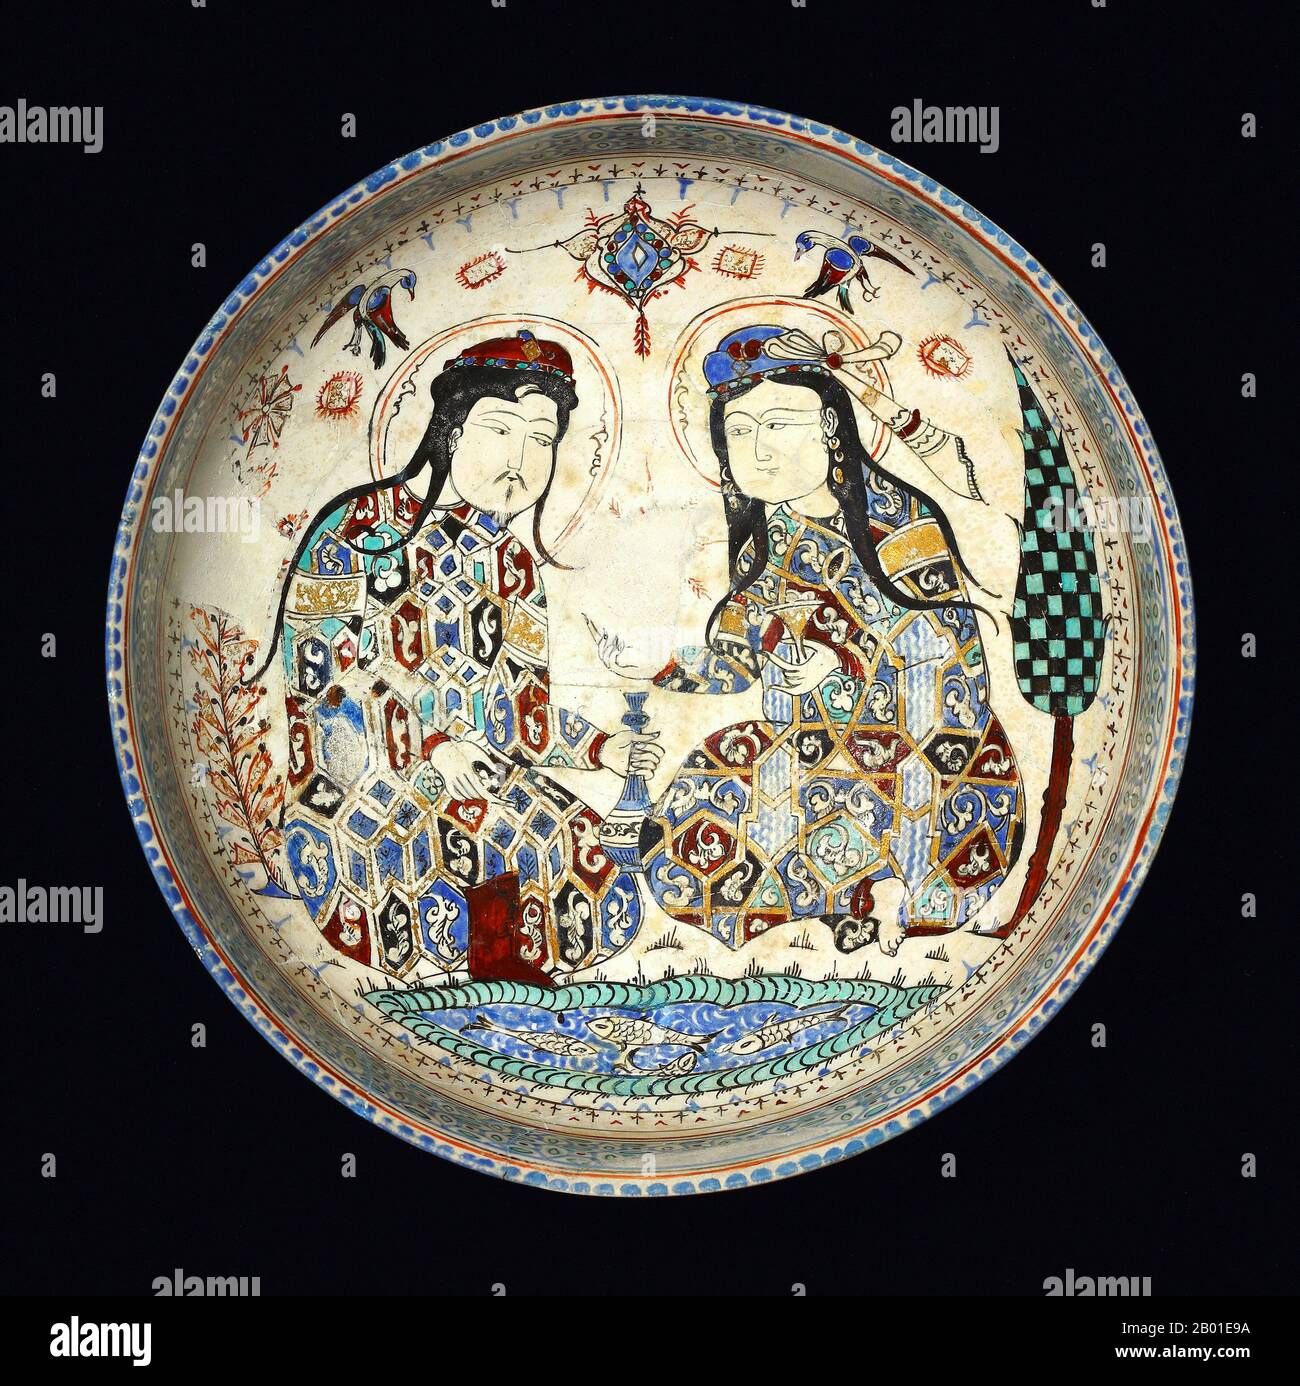 Iran/Persia: Mongol couple, late Khwarezmid or early Ilkhanid, represented on a painted, glazed plate, Kashan, 13th century.  The Ilkhanate, also spelled Il-khanate, was a Mongol khanate established in Azerbaijan and Persia in the 13th century, considered a part of the Mongol Empire.  The Ilkhanate was based, originally, on Genghis Khan's campaigns in the Khwarezmid Empire in 1219-1224, and founded by Genghis's grandson, Hulagu, in territories which today comprise most of Iran, Iraq, Afghanistan, Turkmenistan, Armenia, Azerbaijan, Georgia, Turkey, and some regions of western Pakistan. Stock Photo